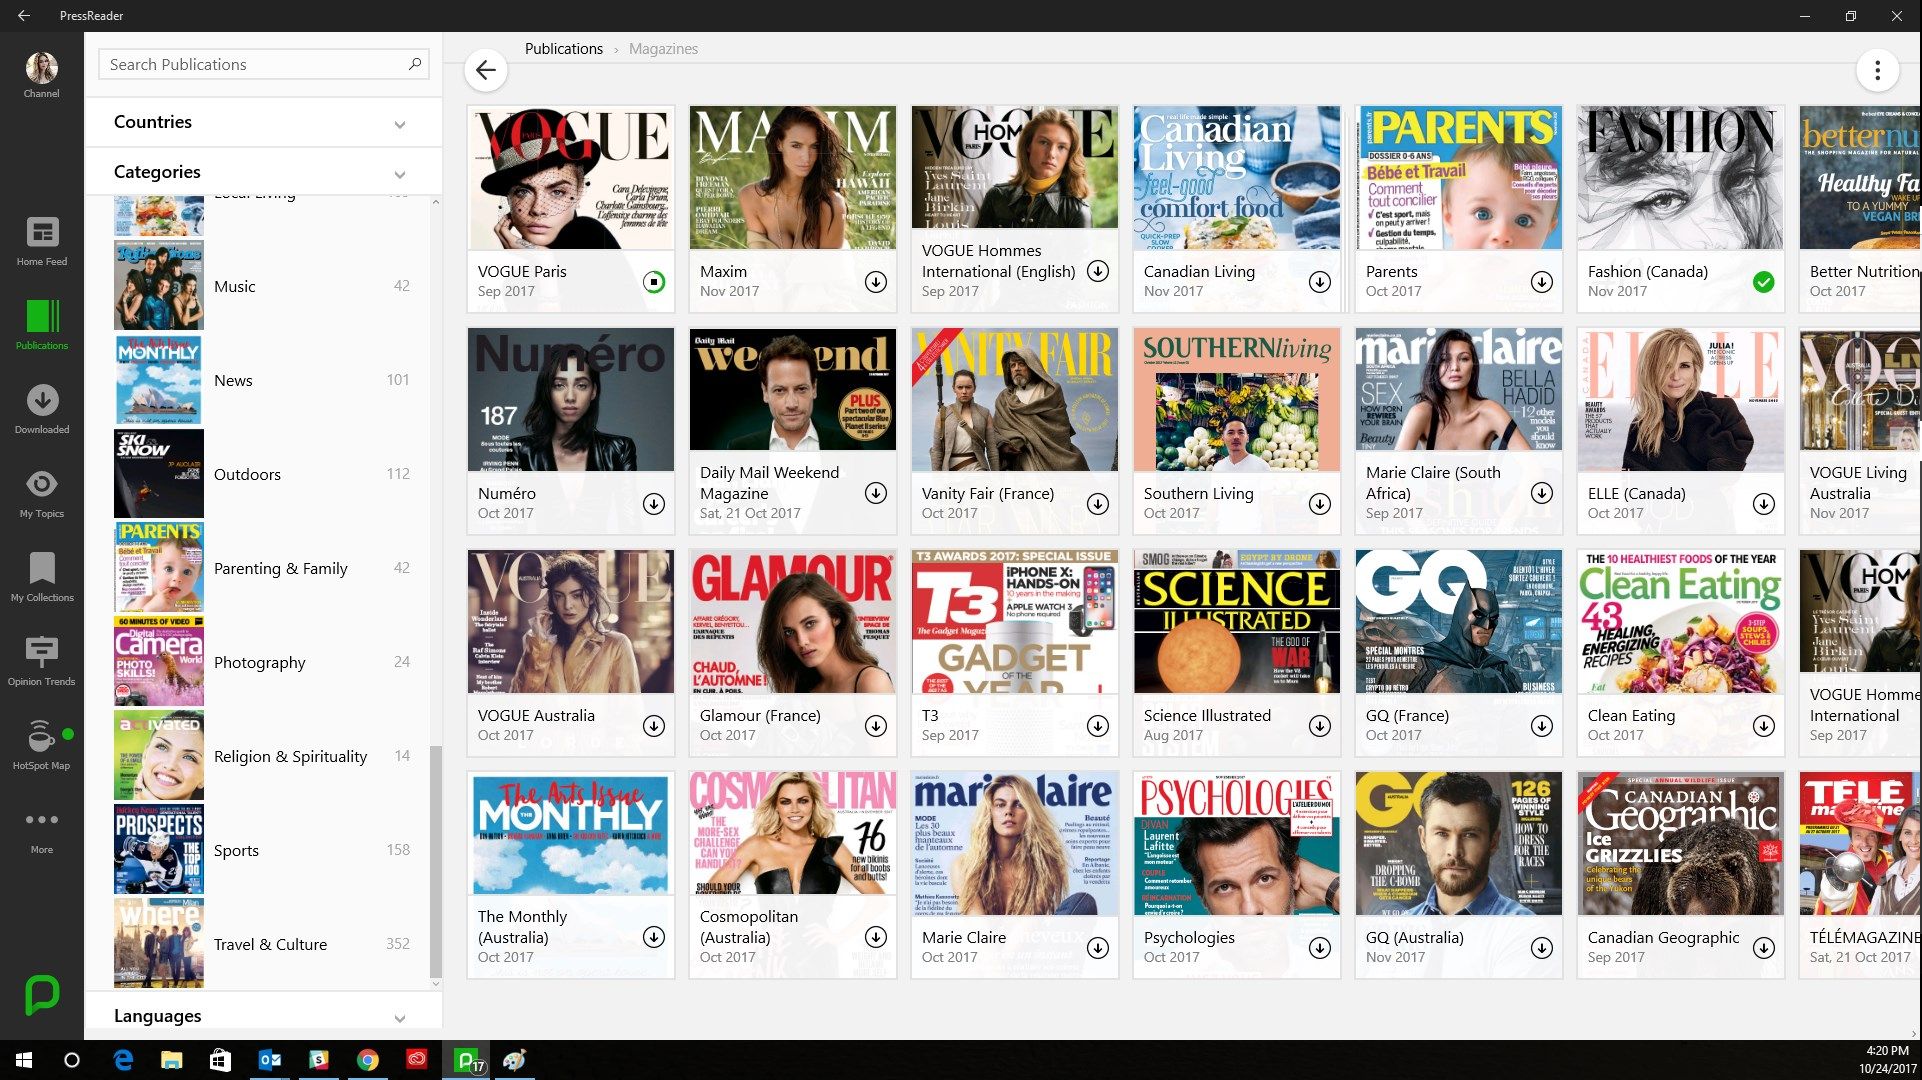 Browse magazine covers quickly and easily.